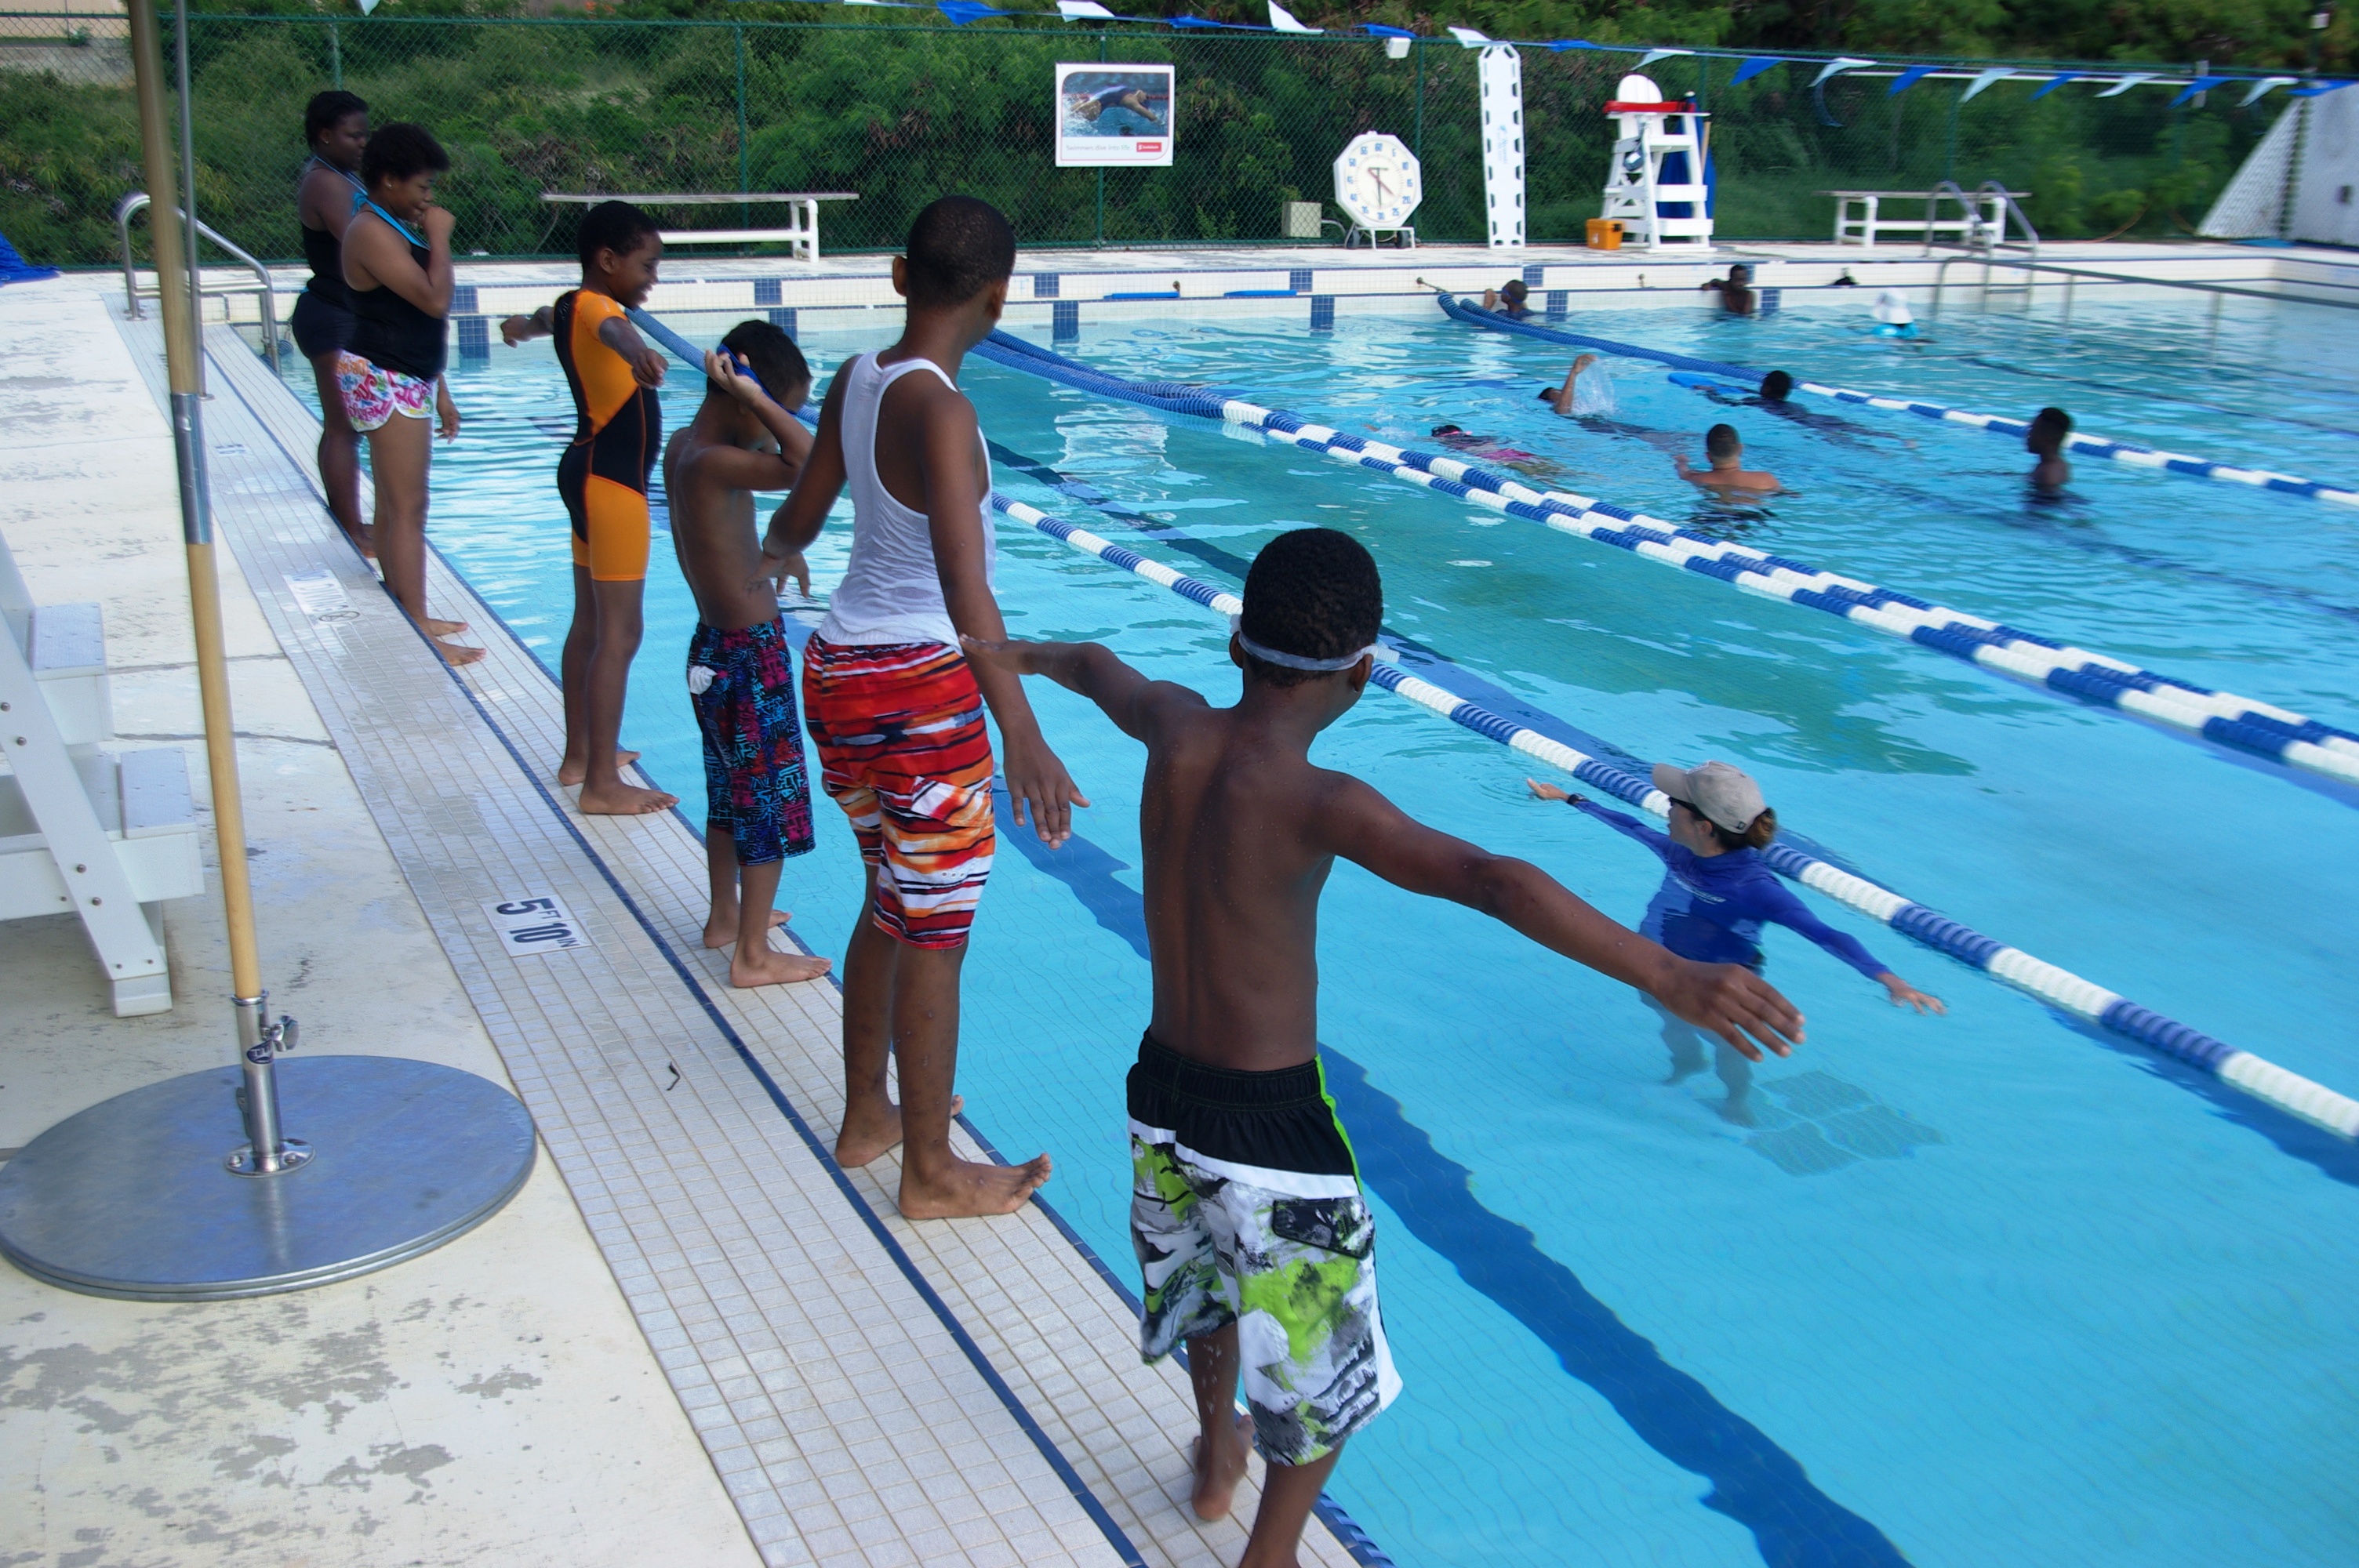 Boy Scouts learn to swim at the St. Thomas Swimming Association pool. (photo: Jimmy Loveland)